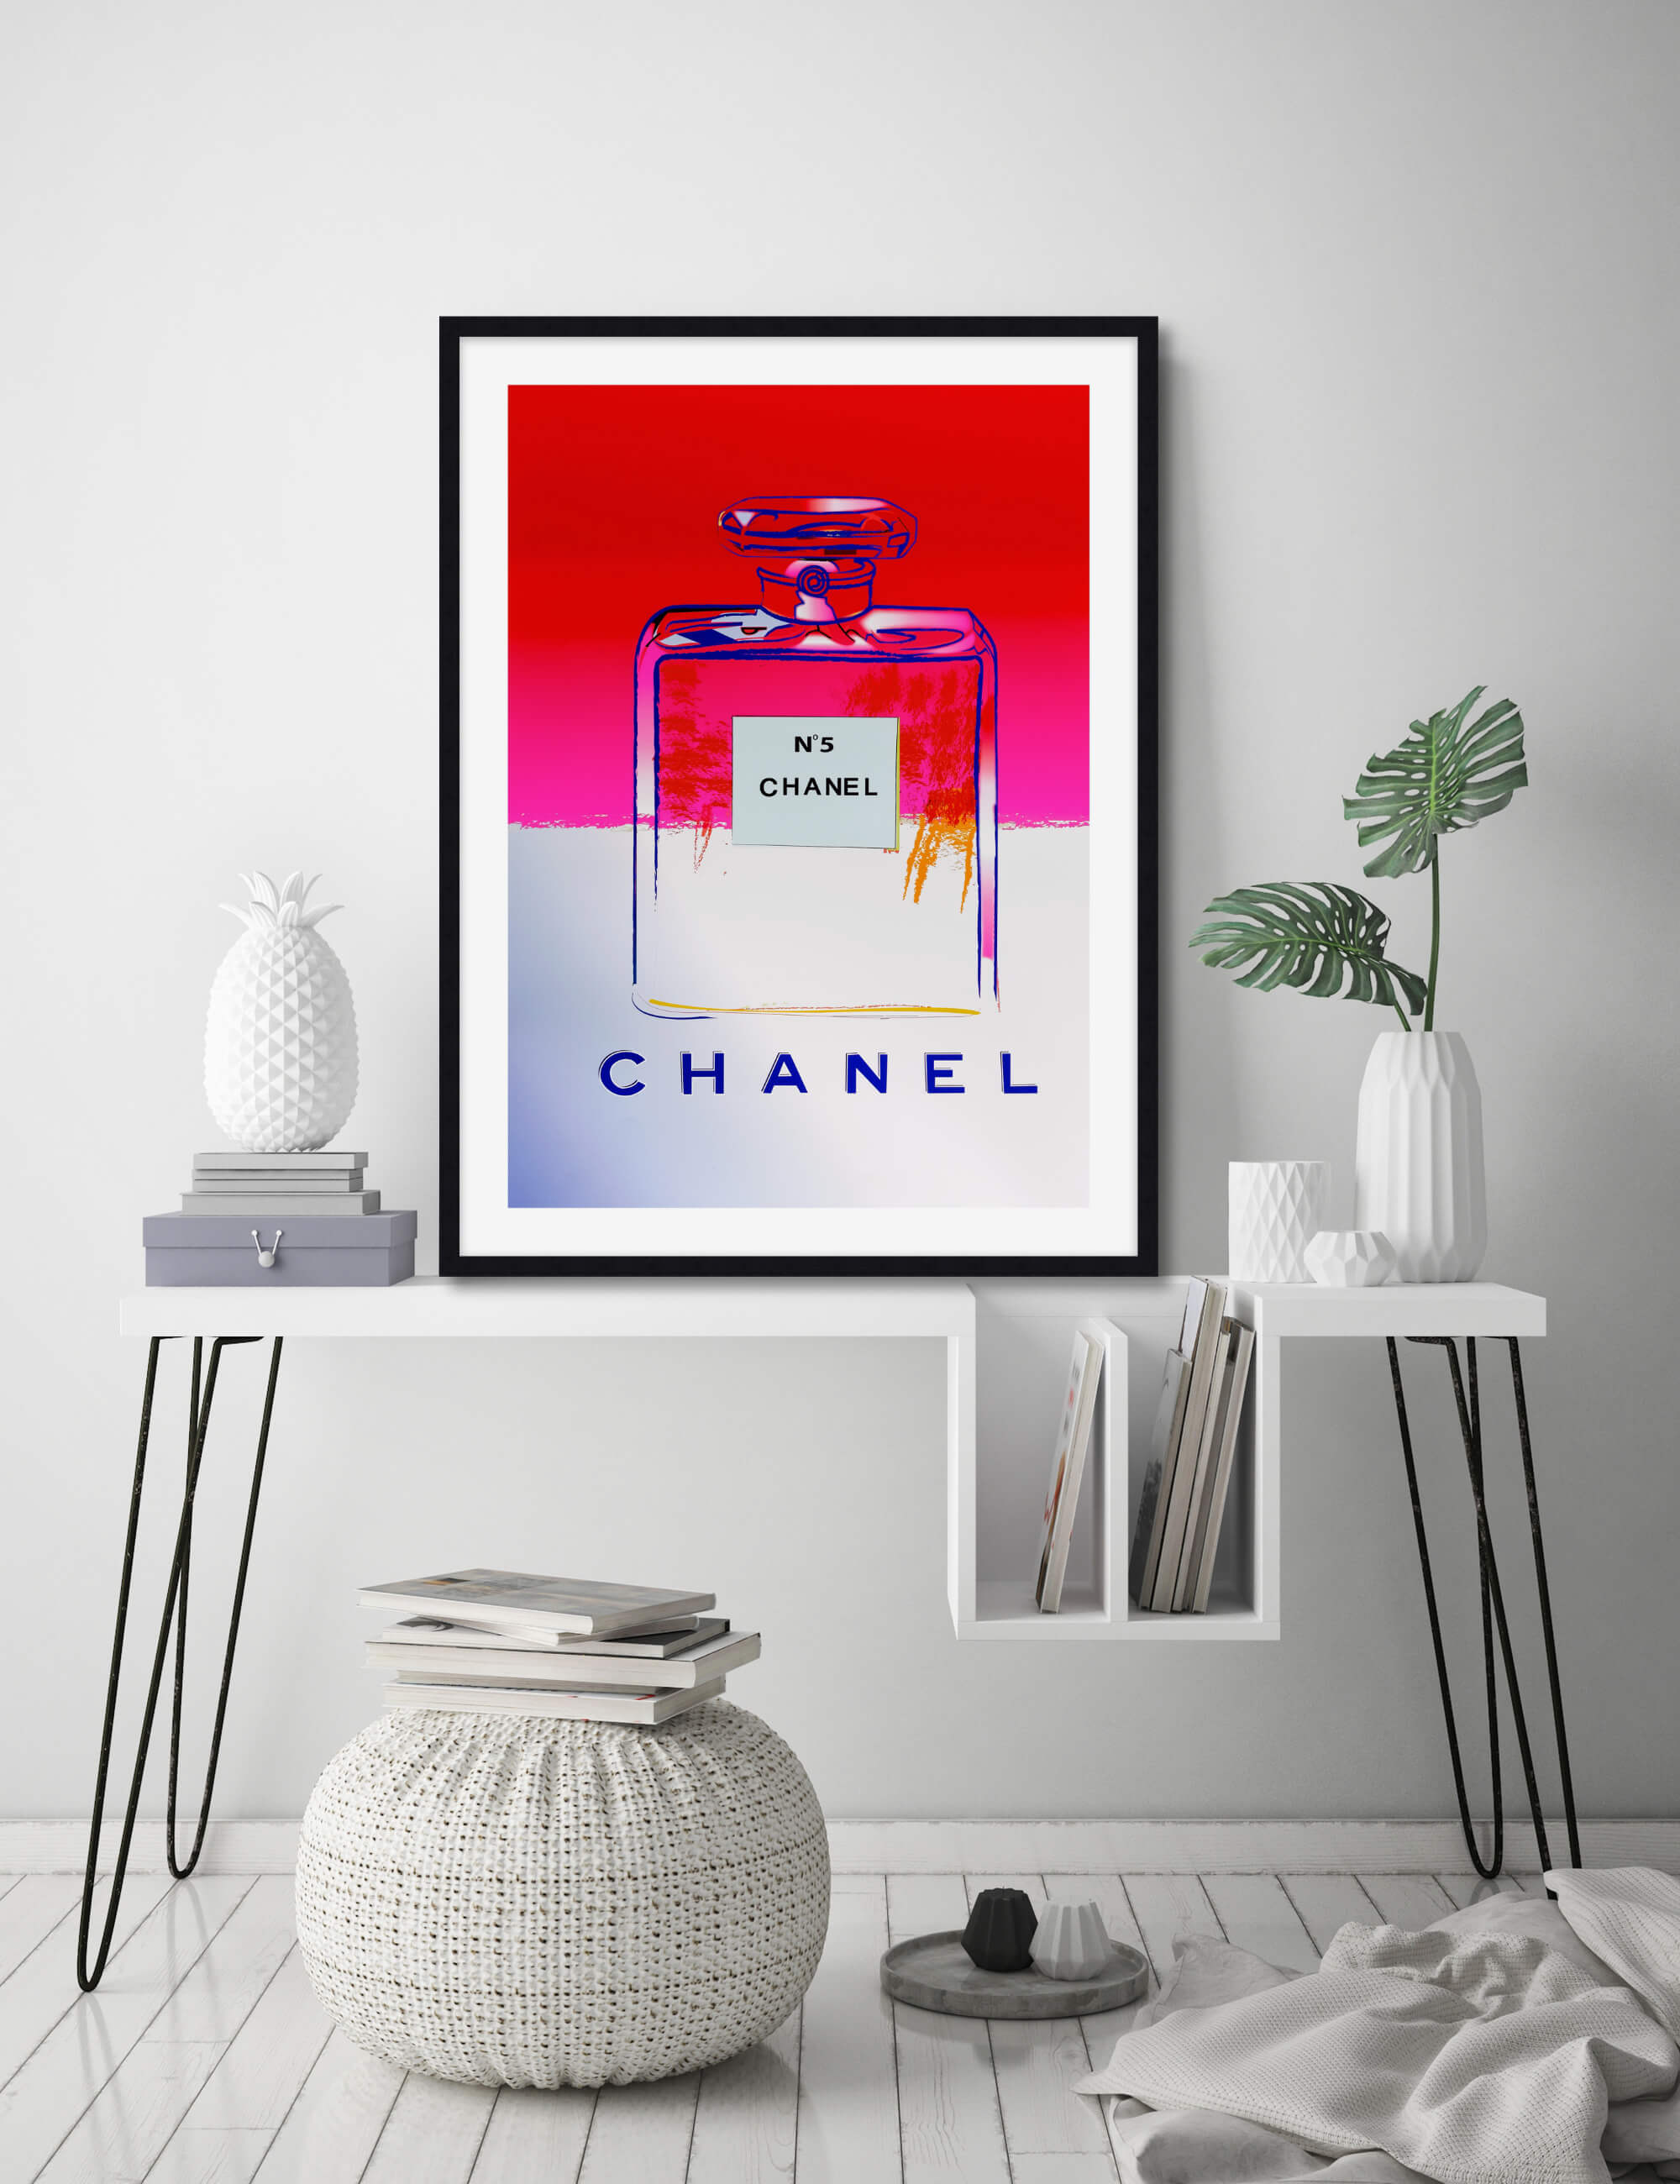 Andy Warhol Chanel - 55 For Sale on 1stDibs